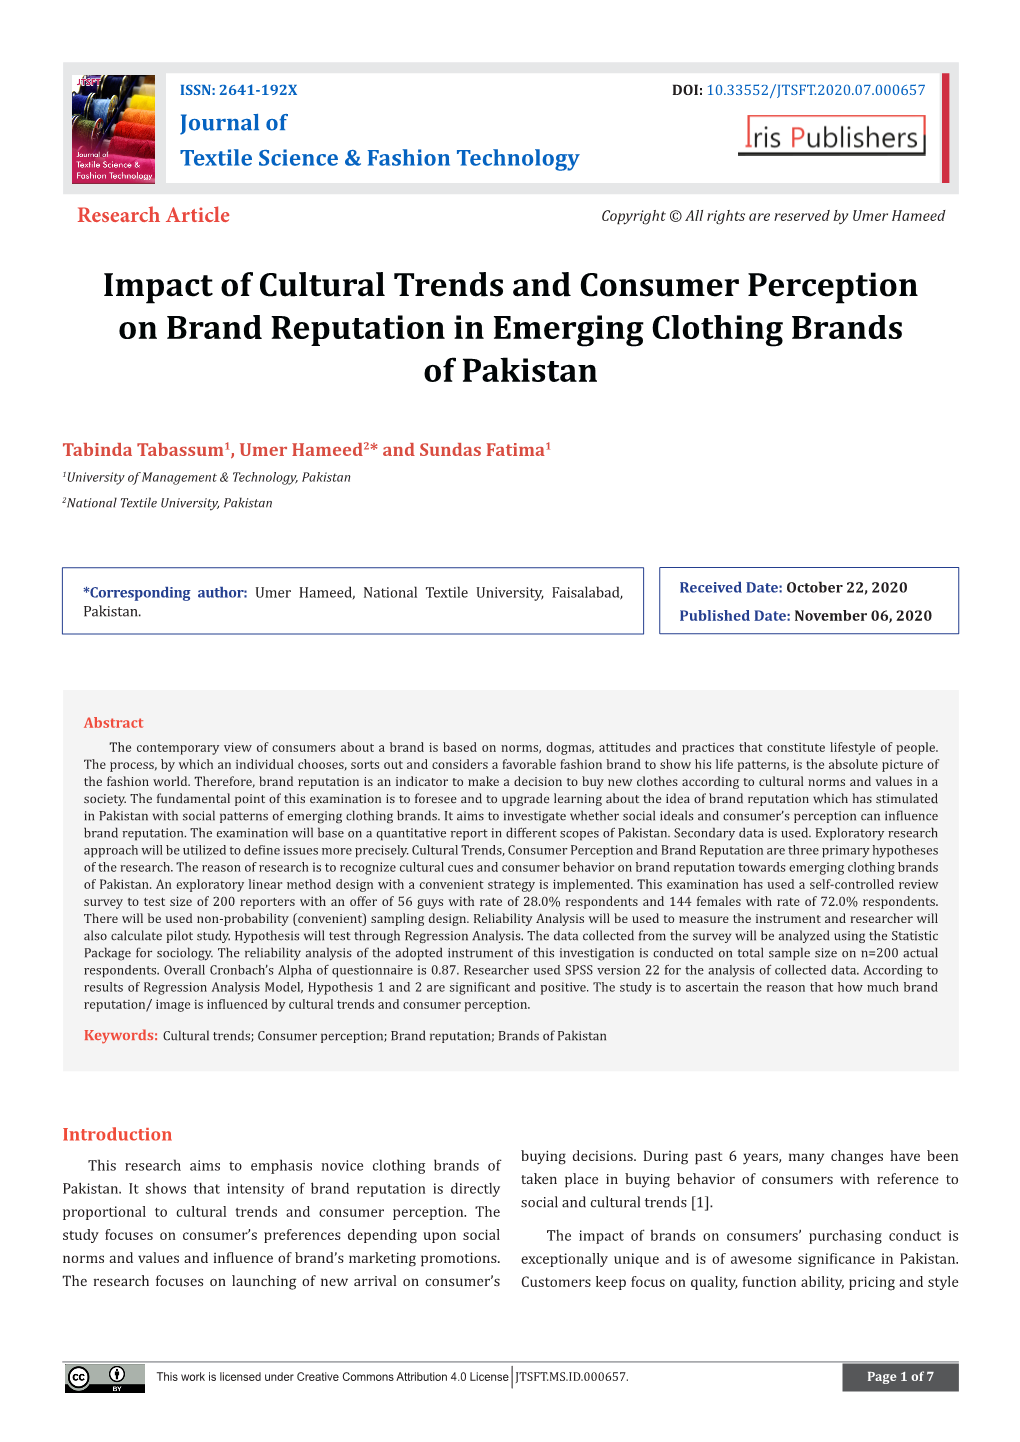 Impact of Cultural Trends and Consumer Perception on Brand Reputation in Emerging Clothing Brands of Pakistan